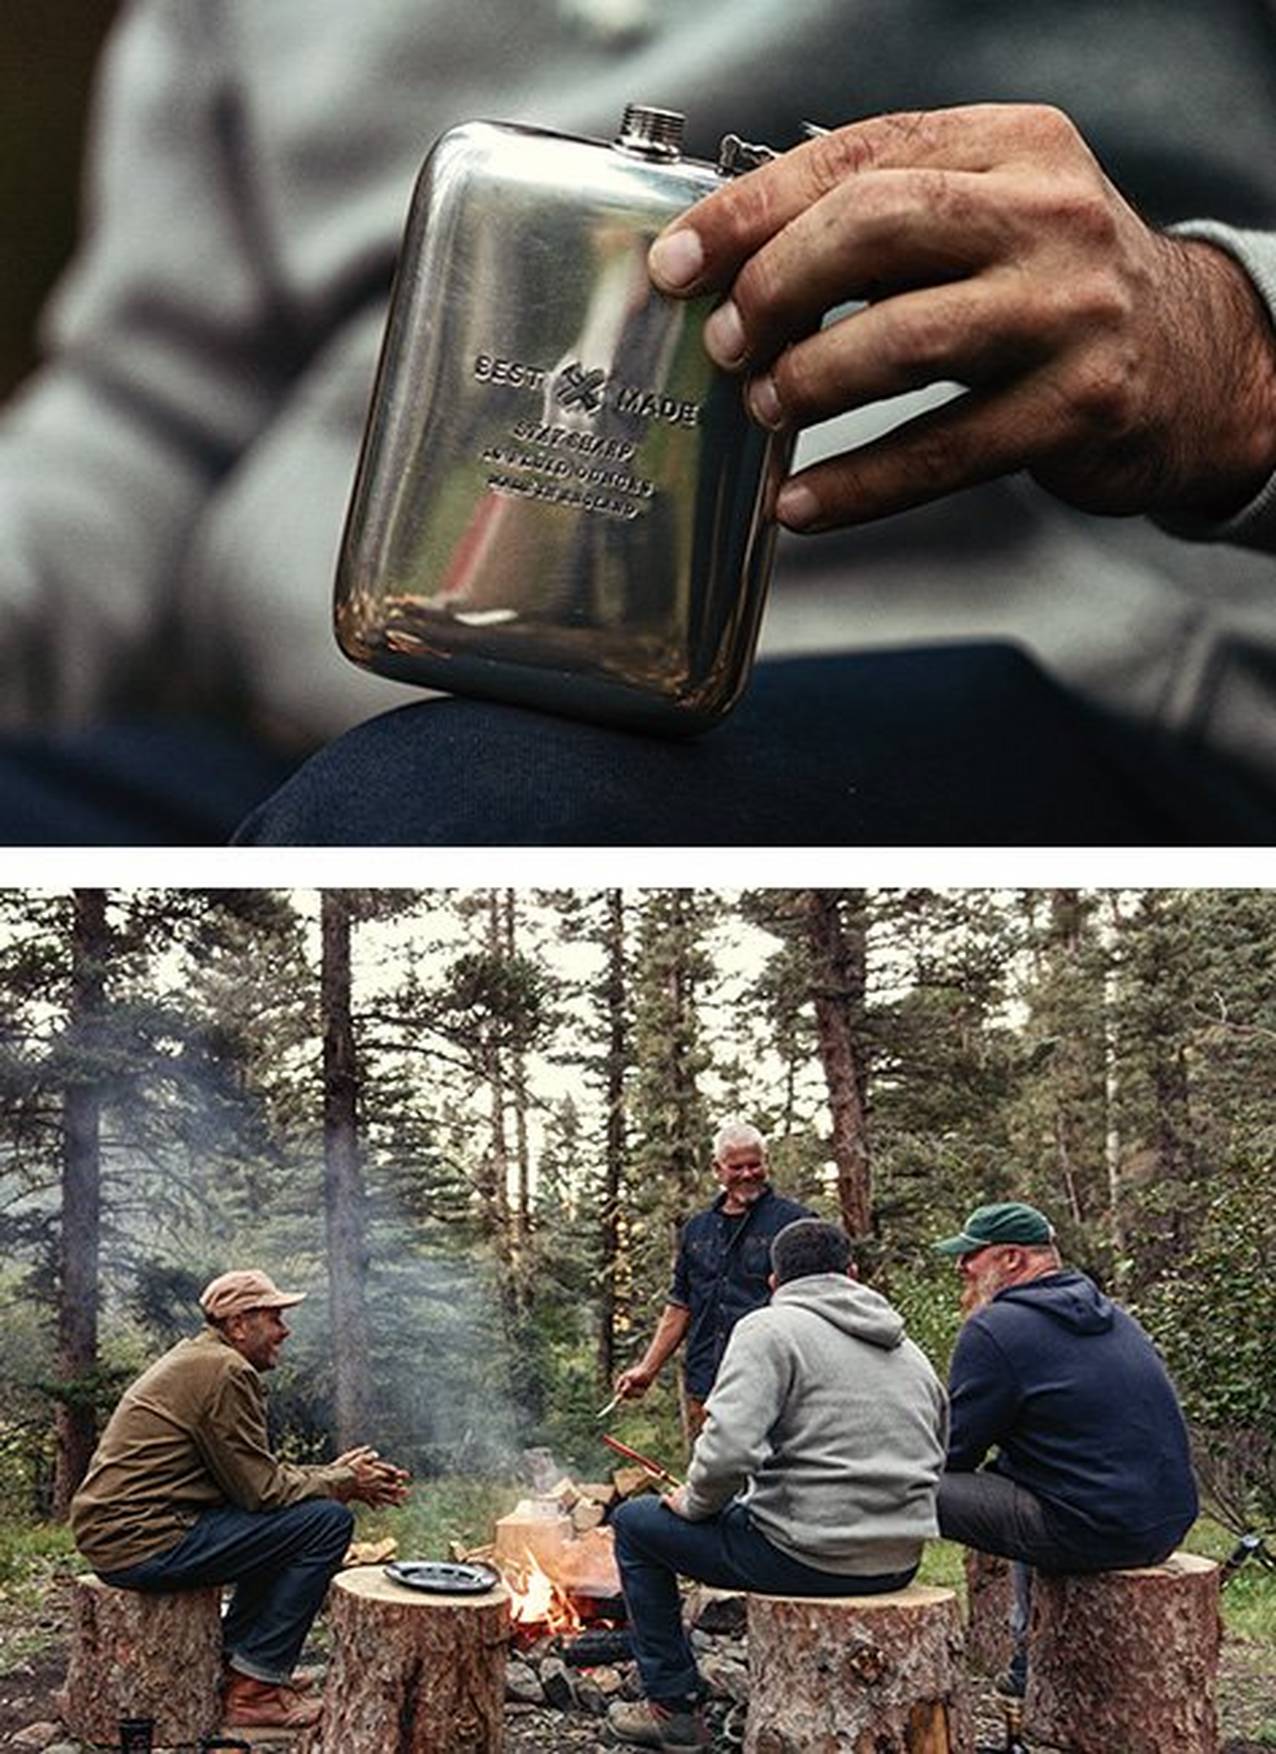 A close up shot of a Best Made flask. A group of men sit around a campfire on stumps. 